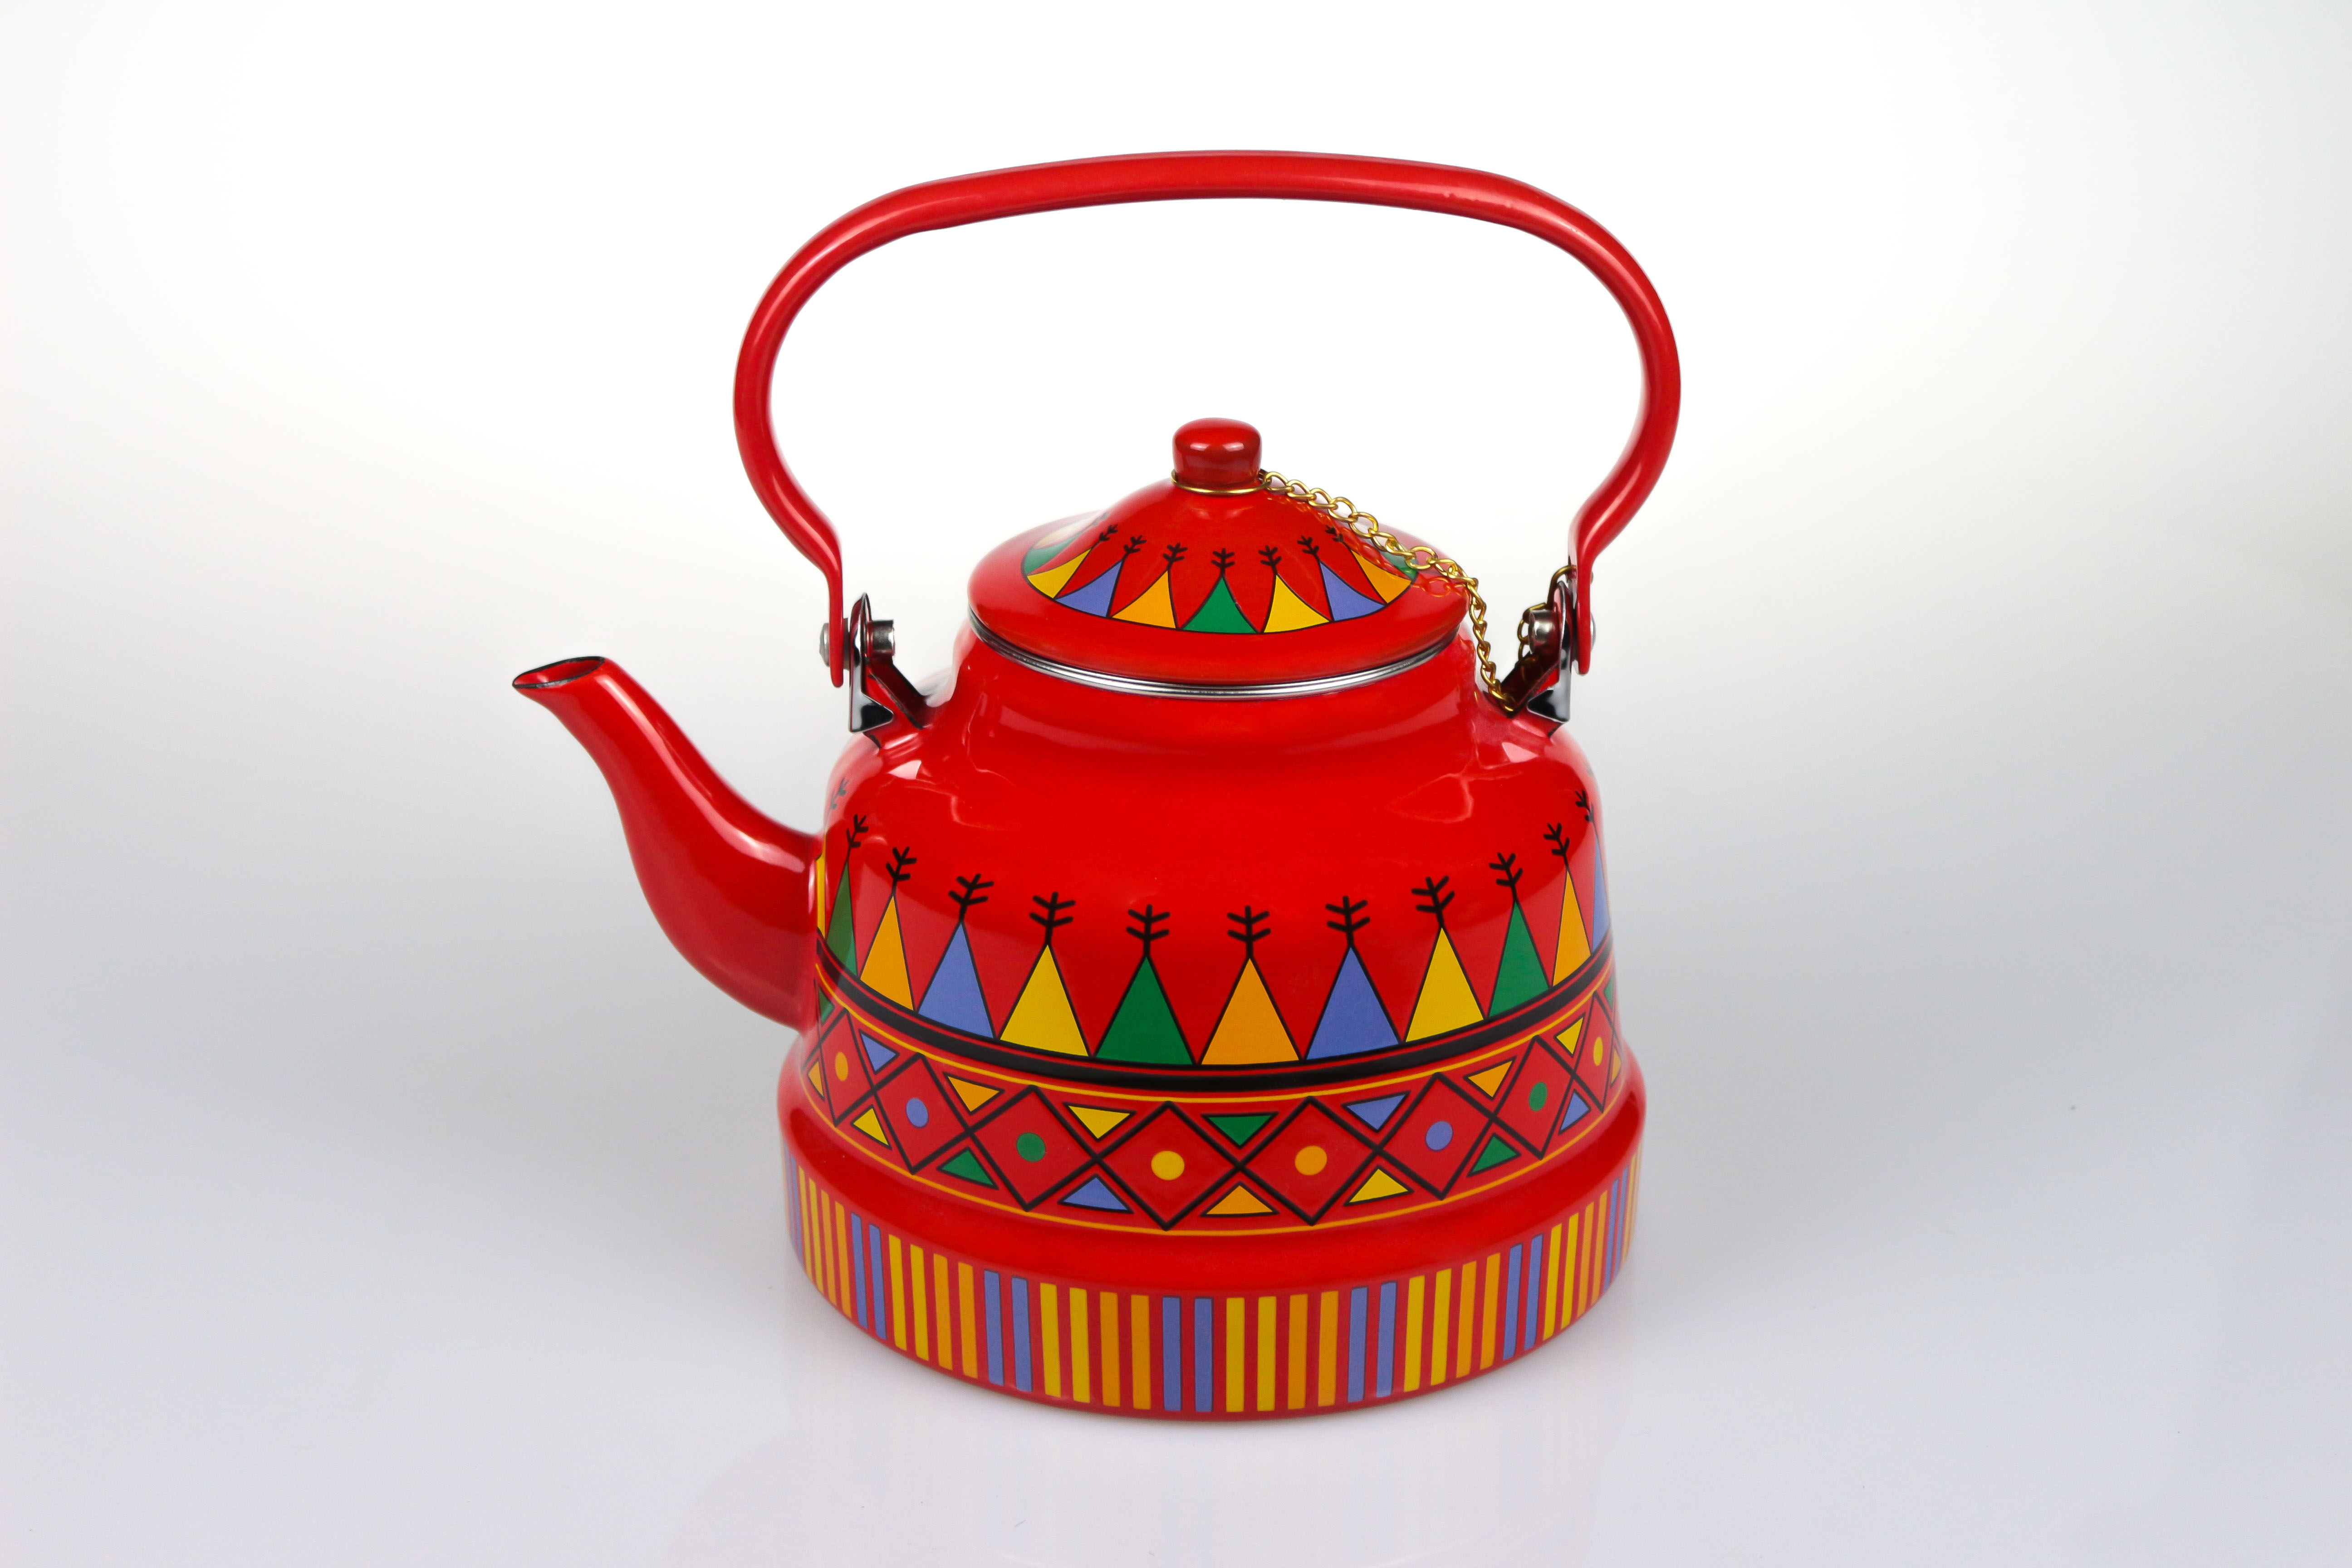 wholesale-enamel-kettle-with-golden-chain-s-s-filter-manufacturer-and